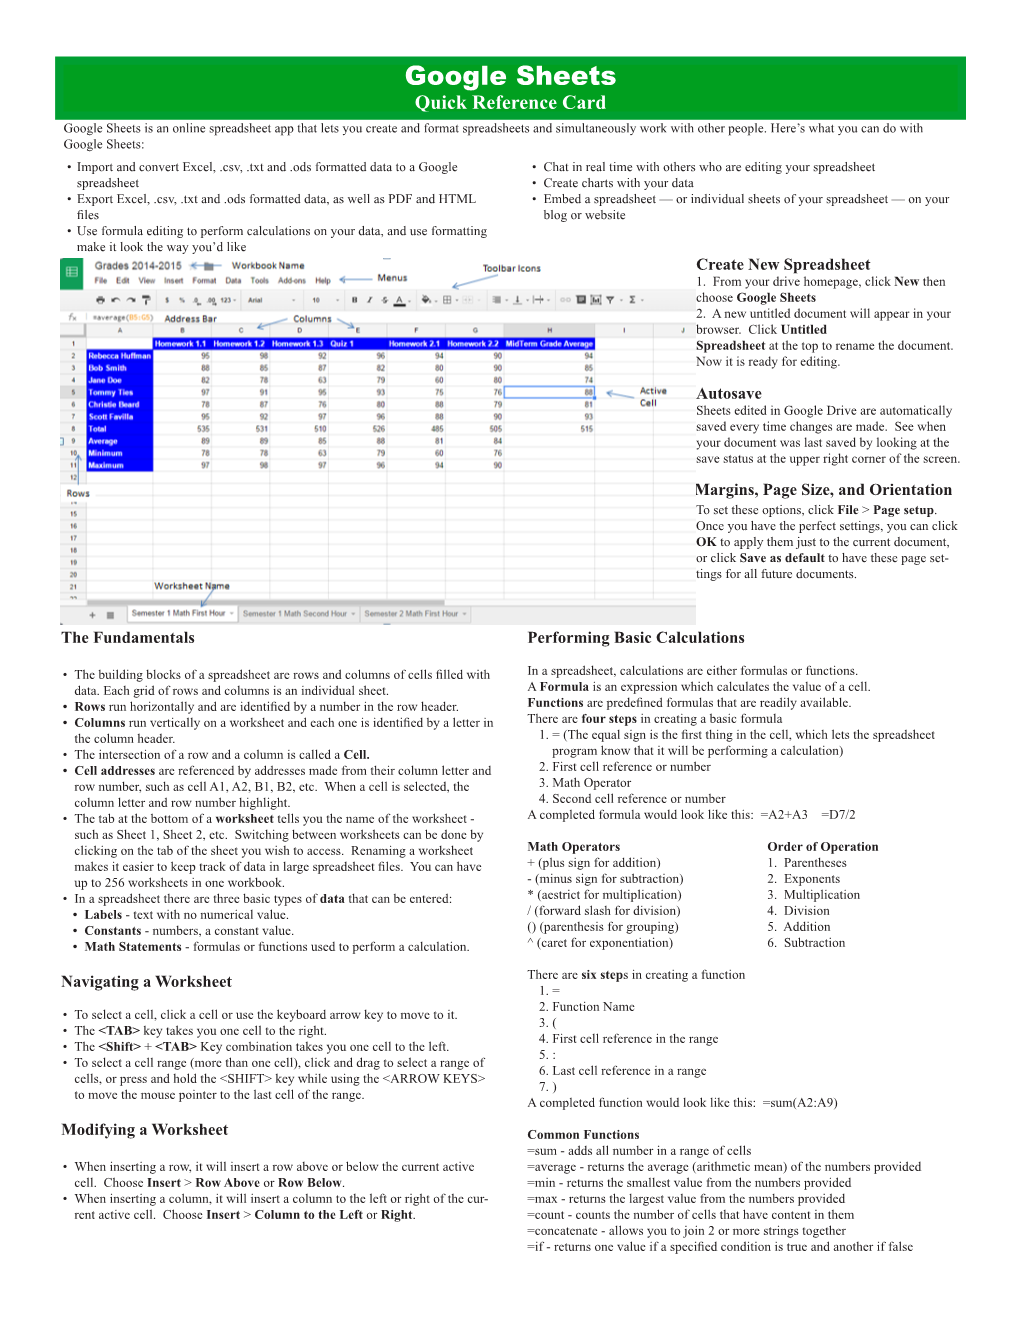 Using Google Sheets Quick Reference Guide